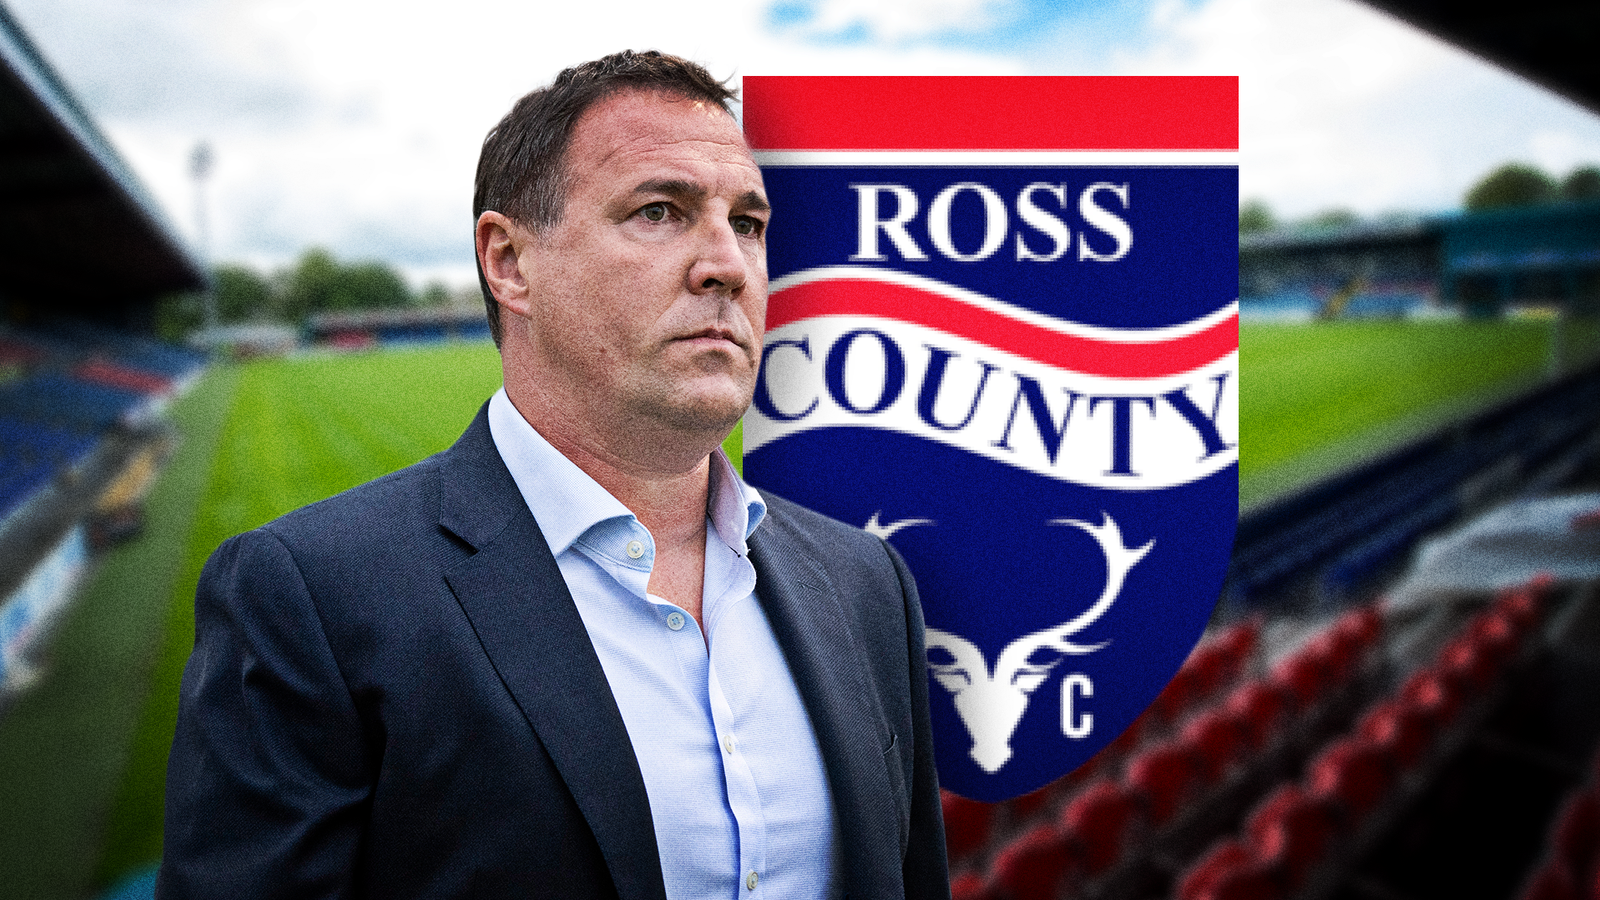 Ross County: Scottish Premiership 2022/23 fixtures and schedule